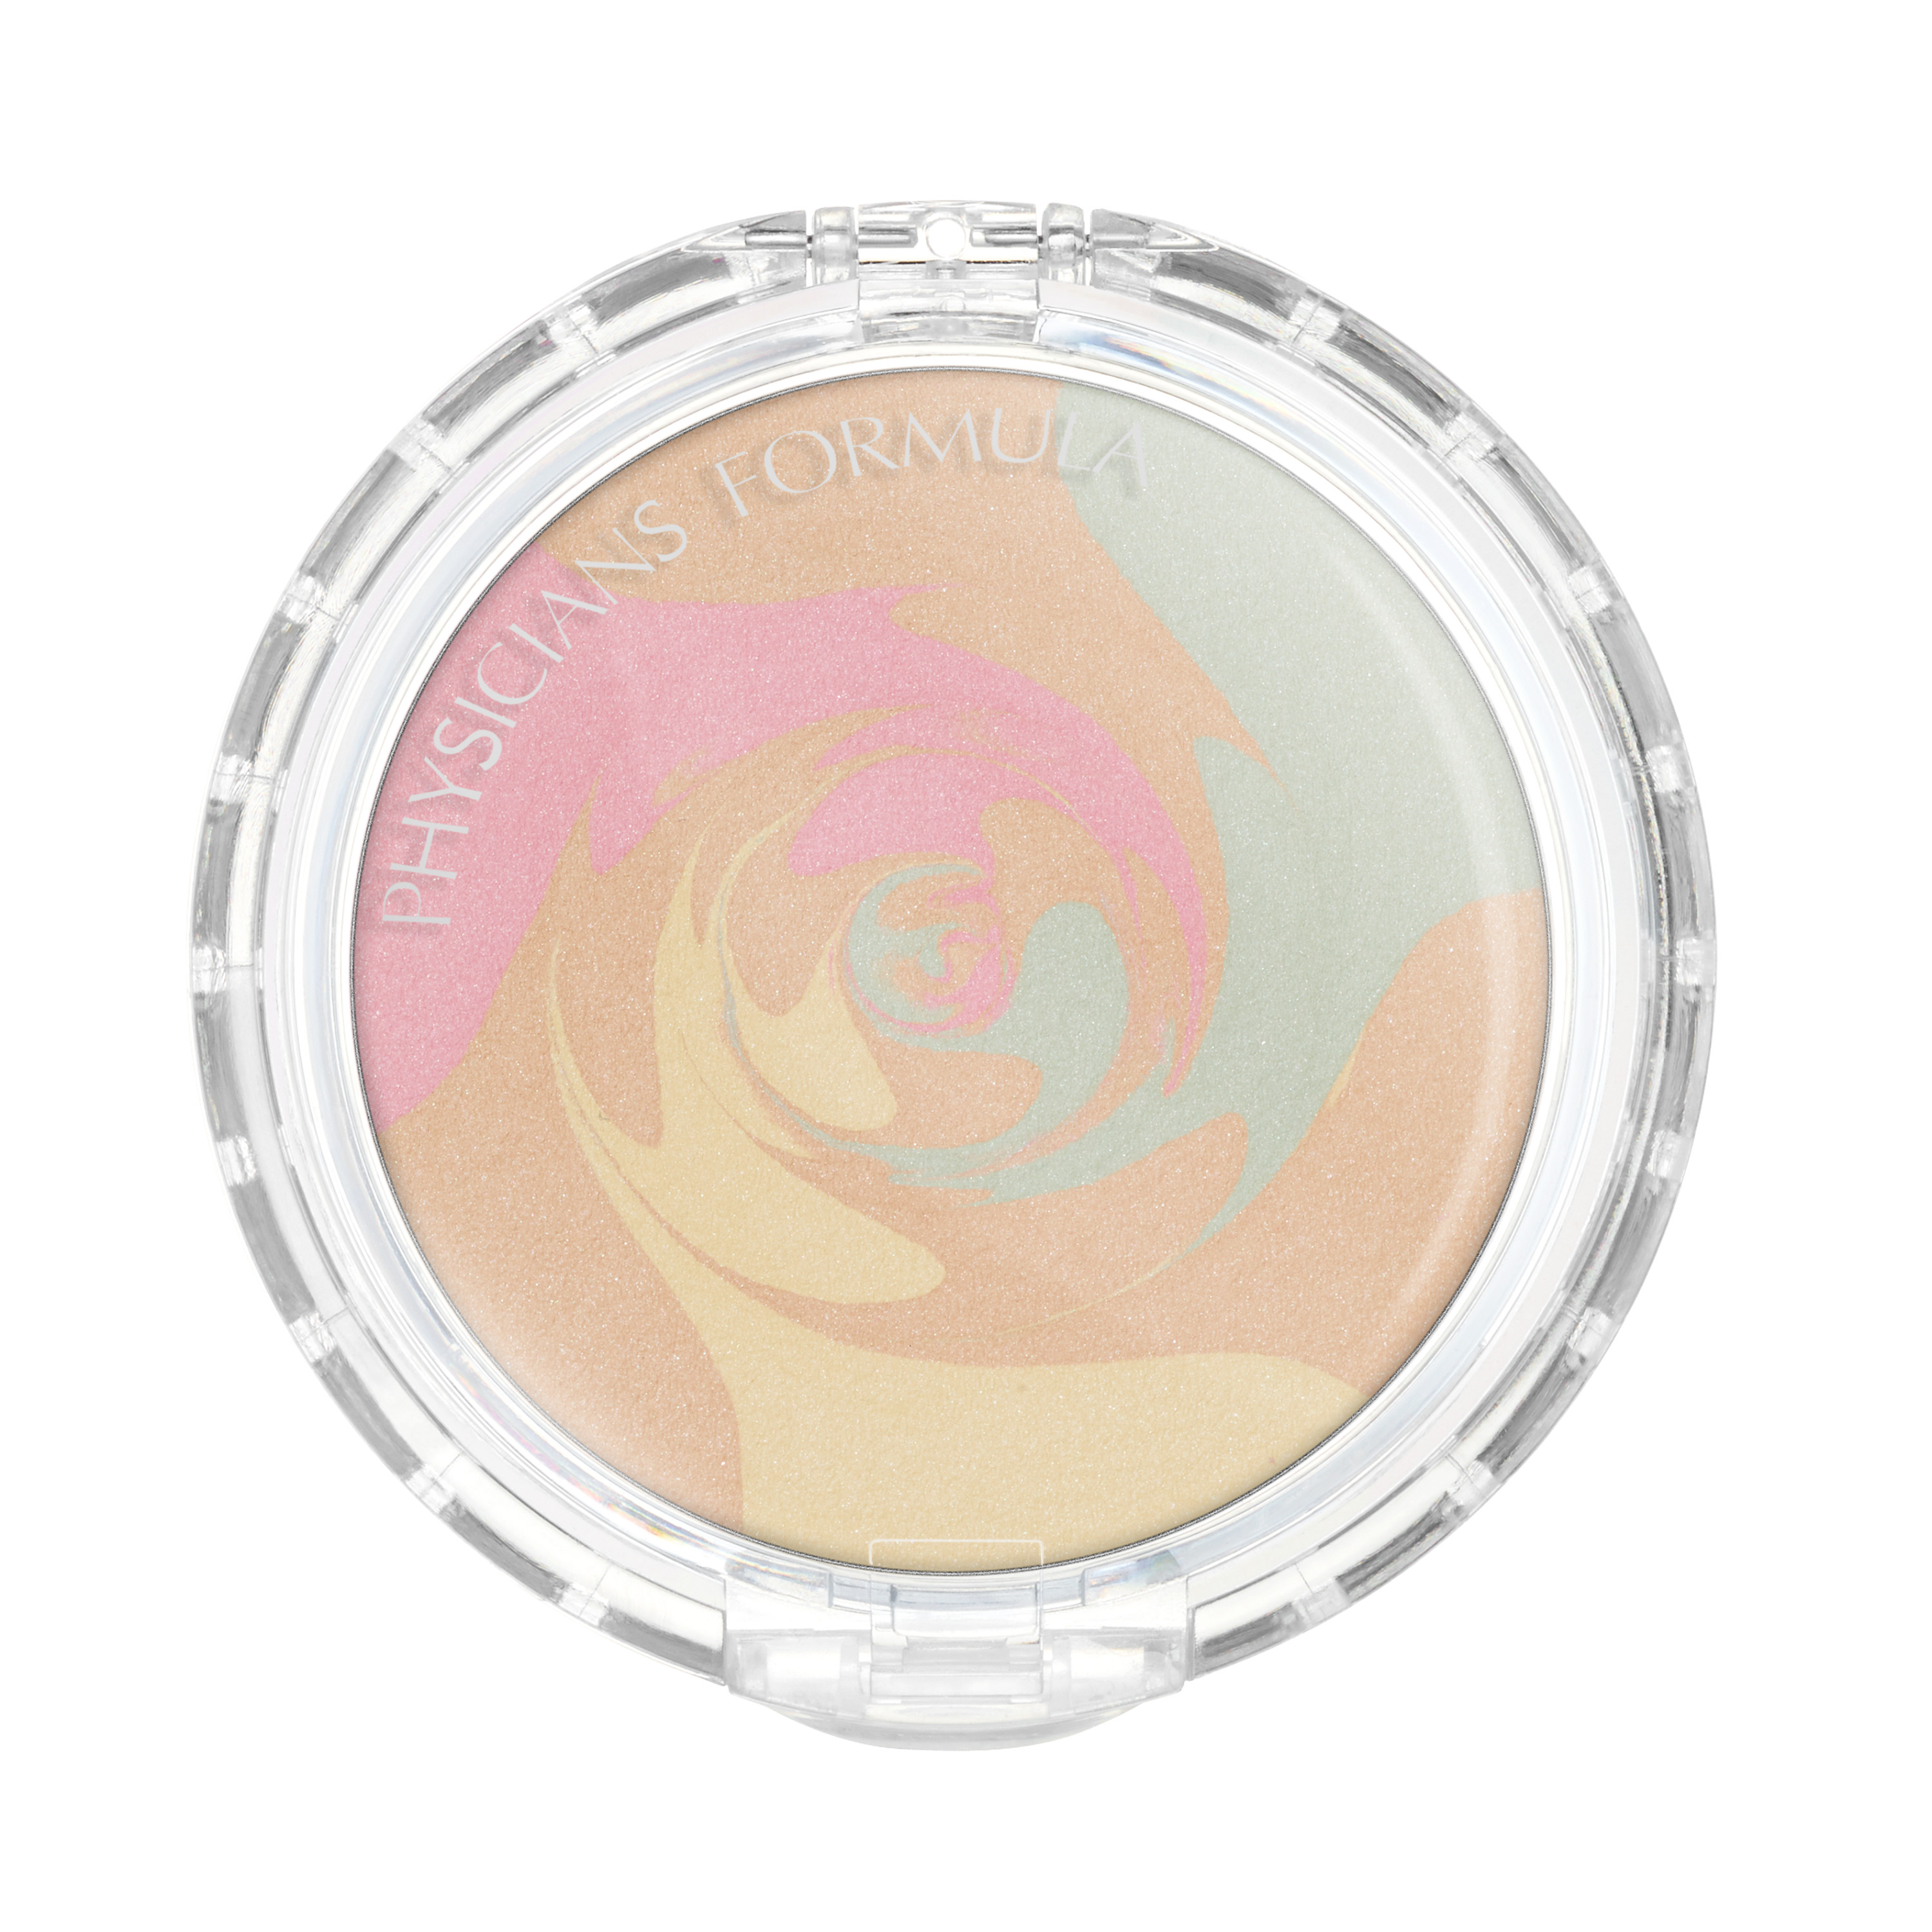 Physicians Formula Mineral Wear® Talc-Free Mineral Correcting Powder, Natural Beige - image 2 of 6